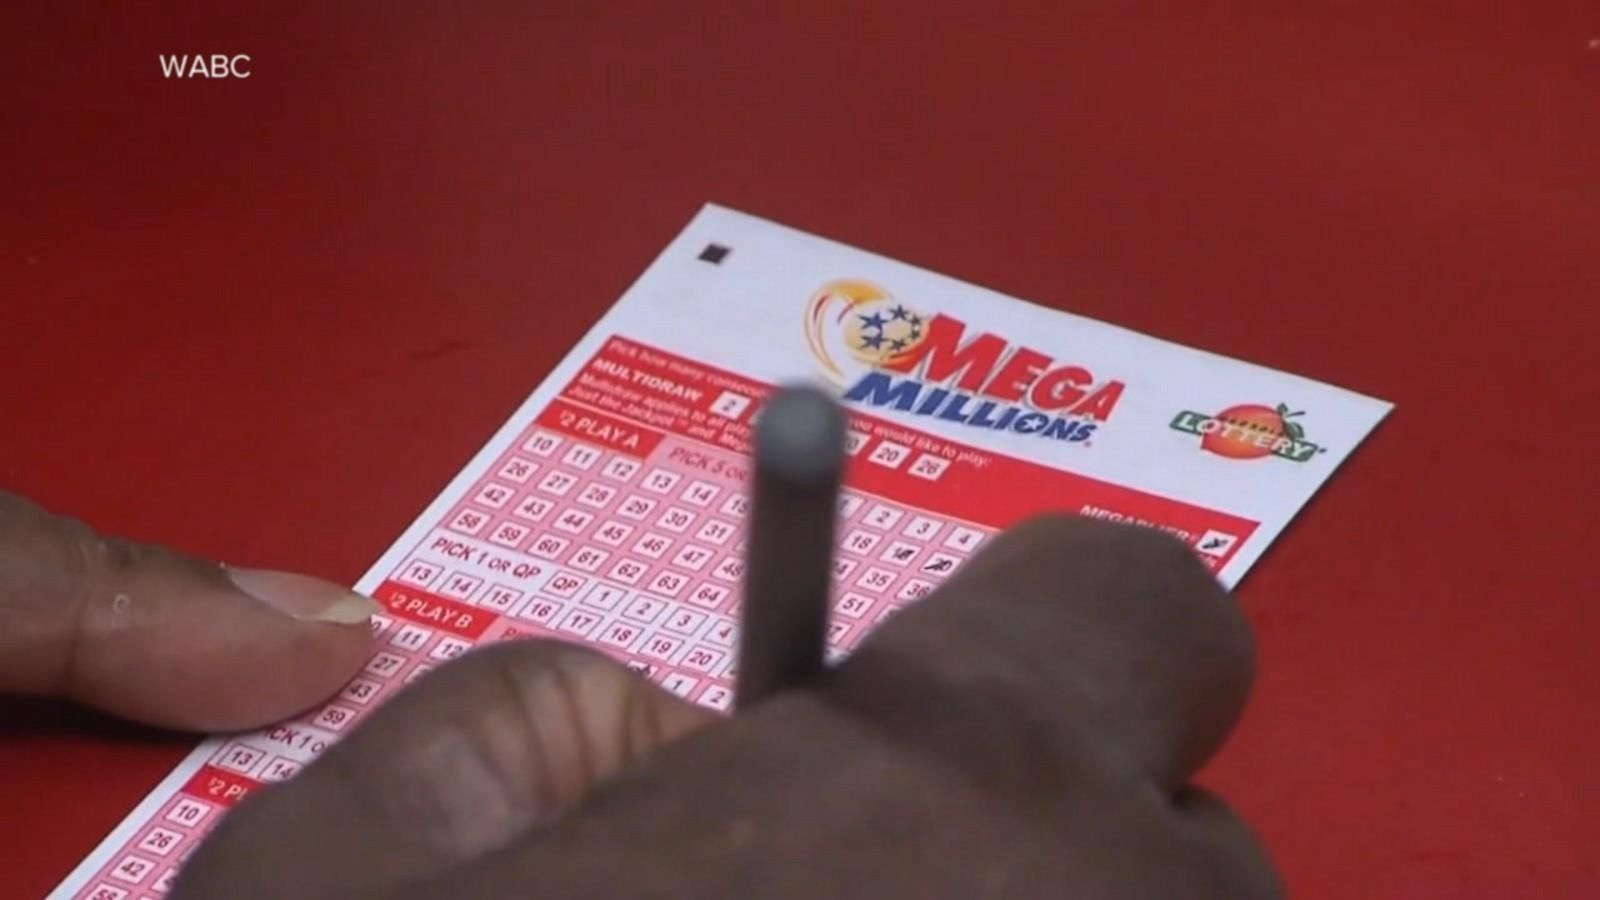 VIDEO: As lottery fever reaches new heights, California warns against scams